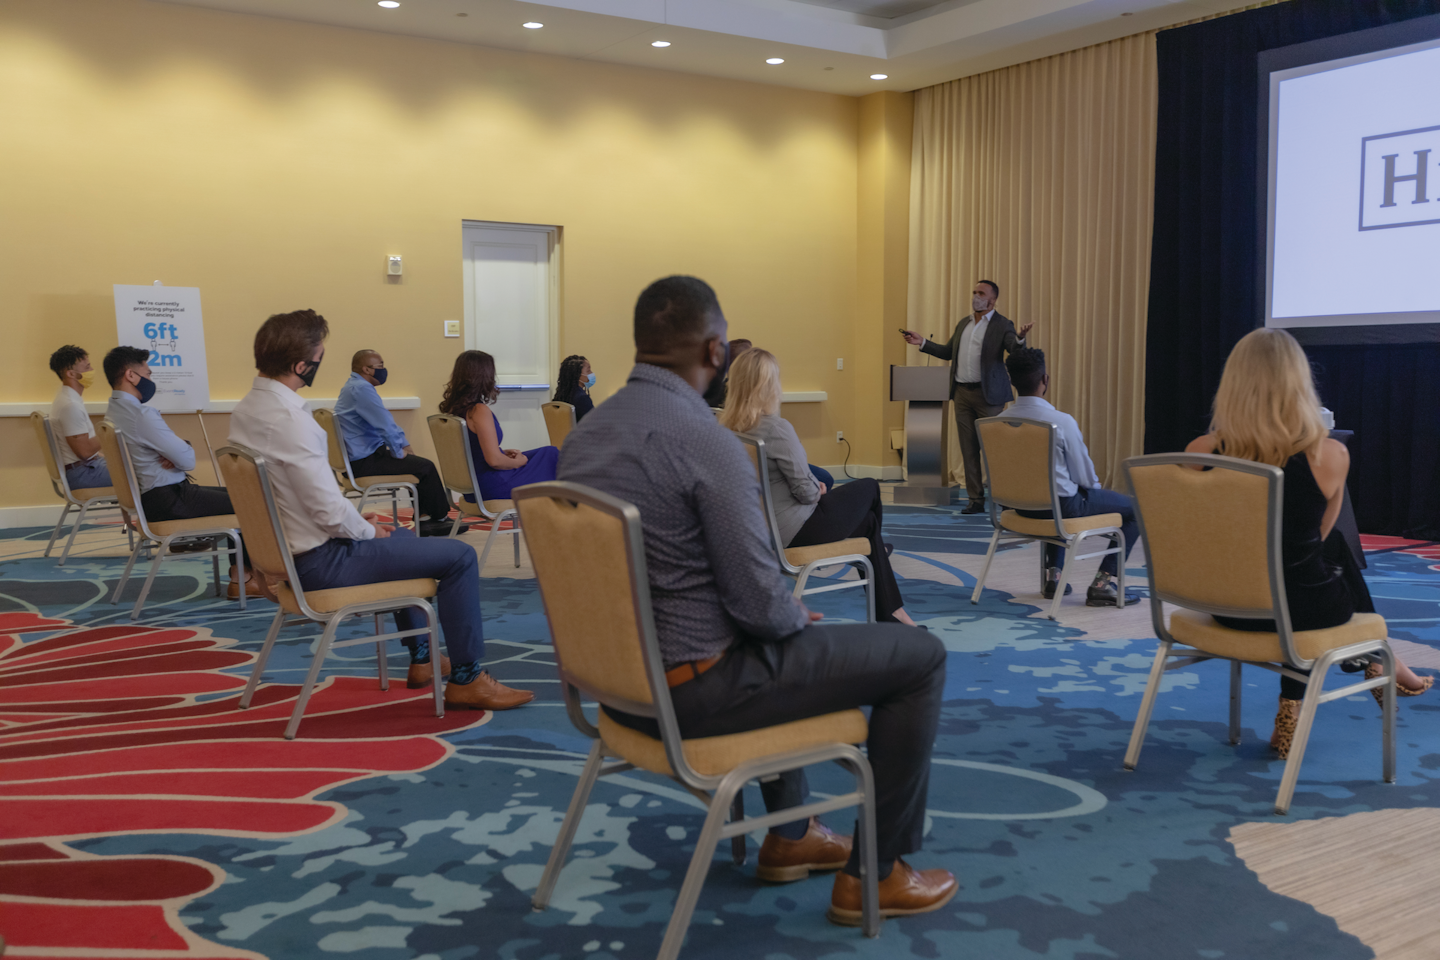 Hilton’s new EventReady program focuses on safe practices for meetings and events, specifically surrounding room layouts, catering, environmental impact, and more.